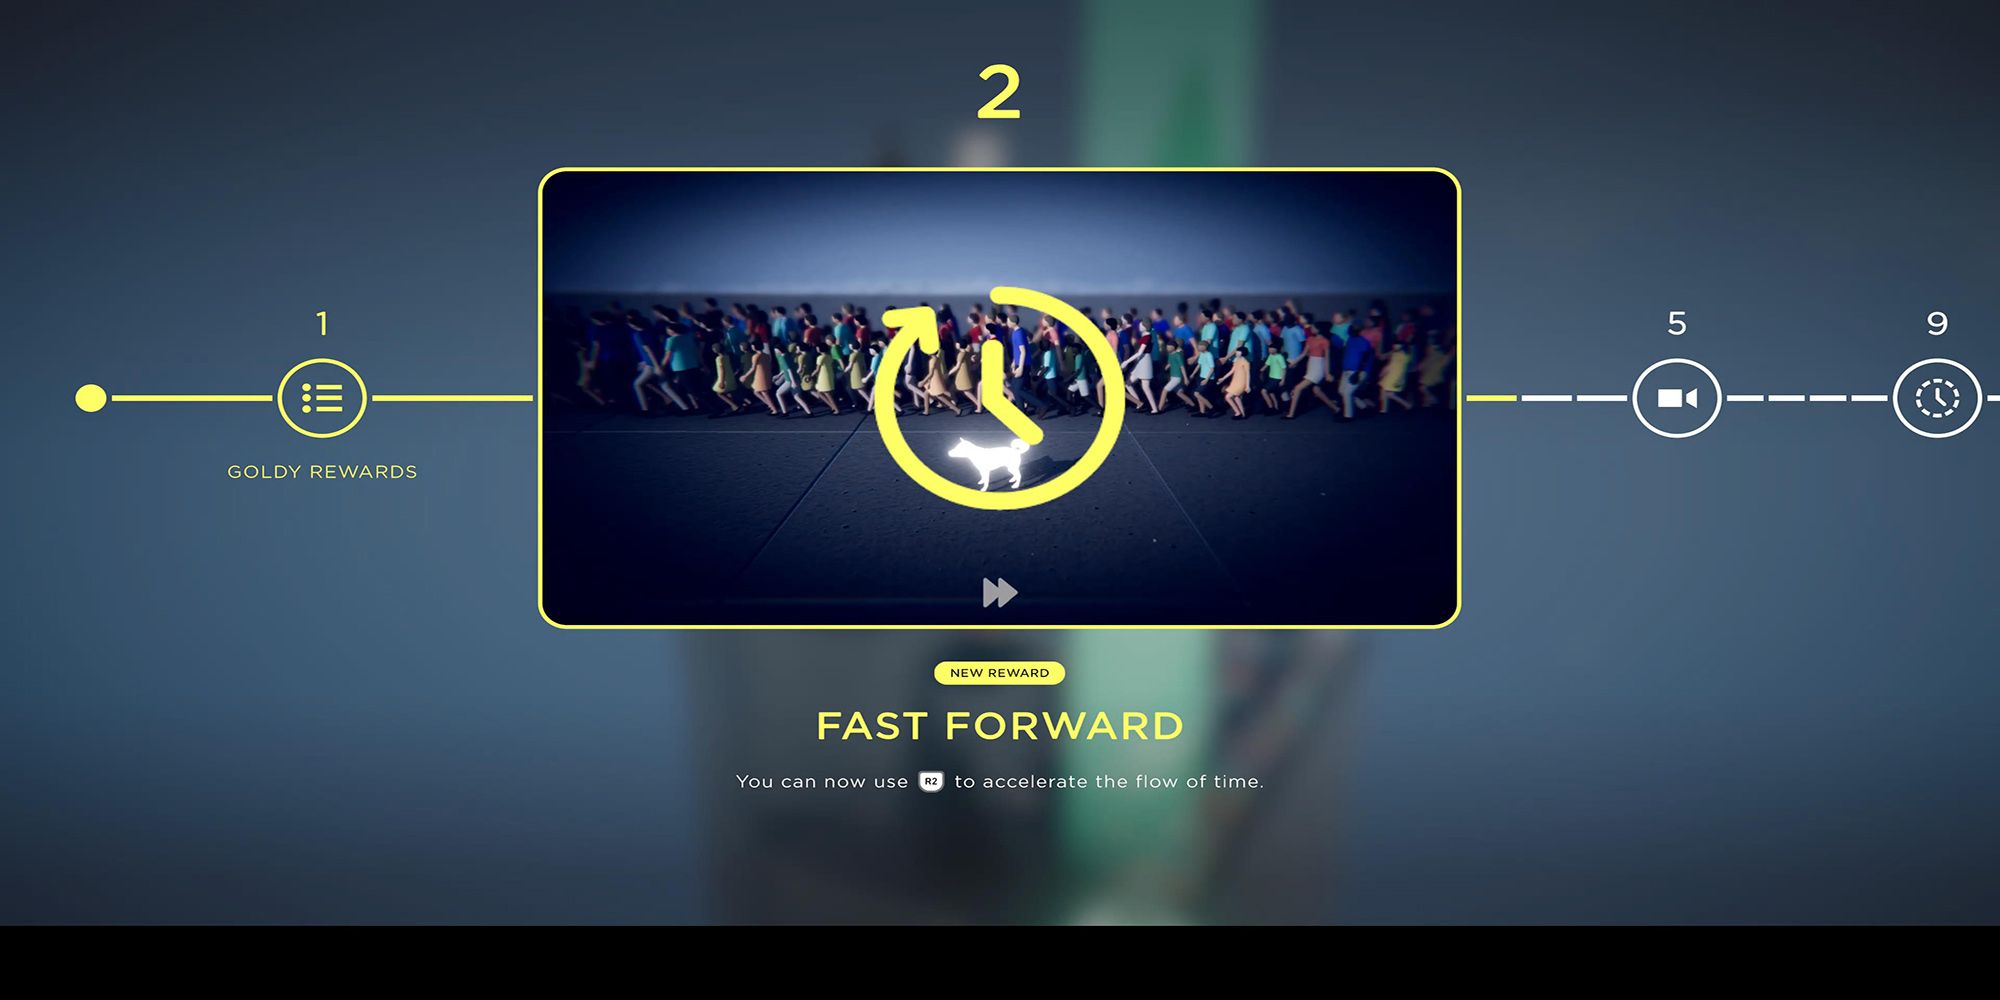 After earning two Goldys, you'll earn the ability to Fast Forward time in Humanity.